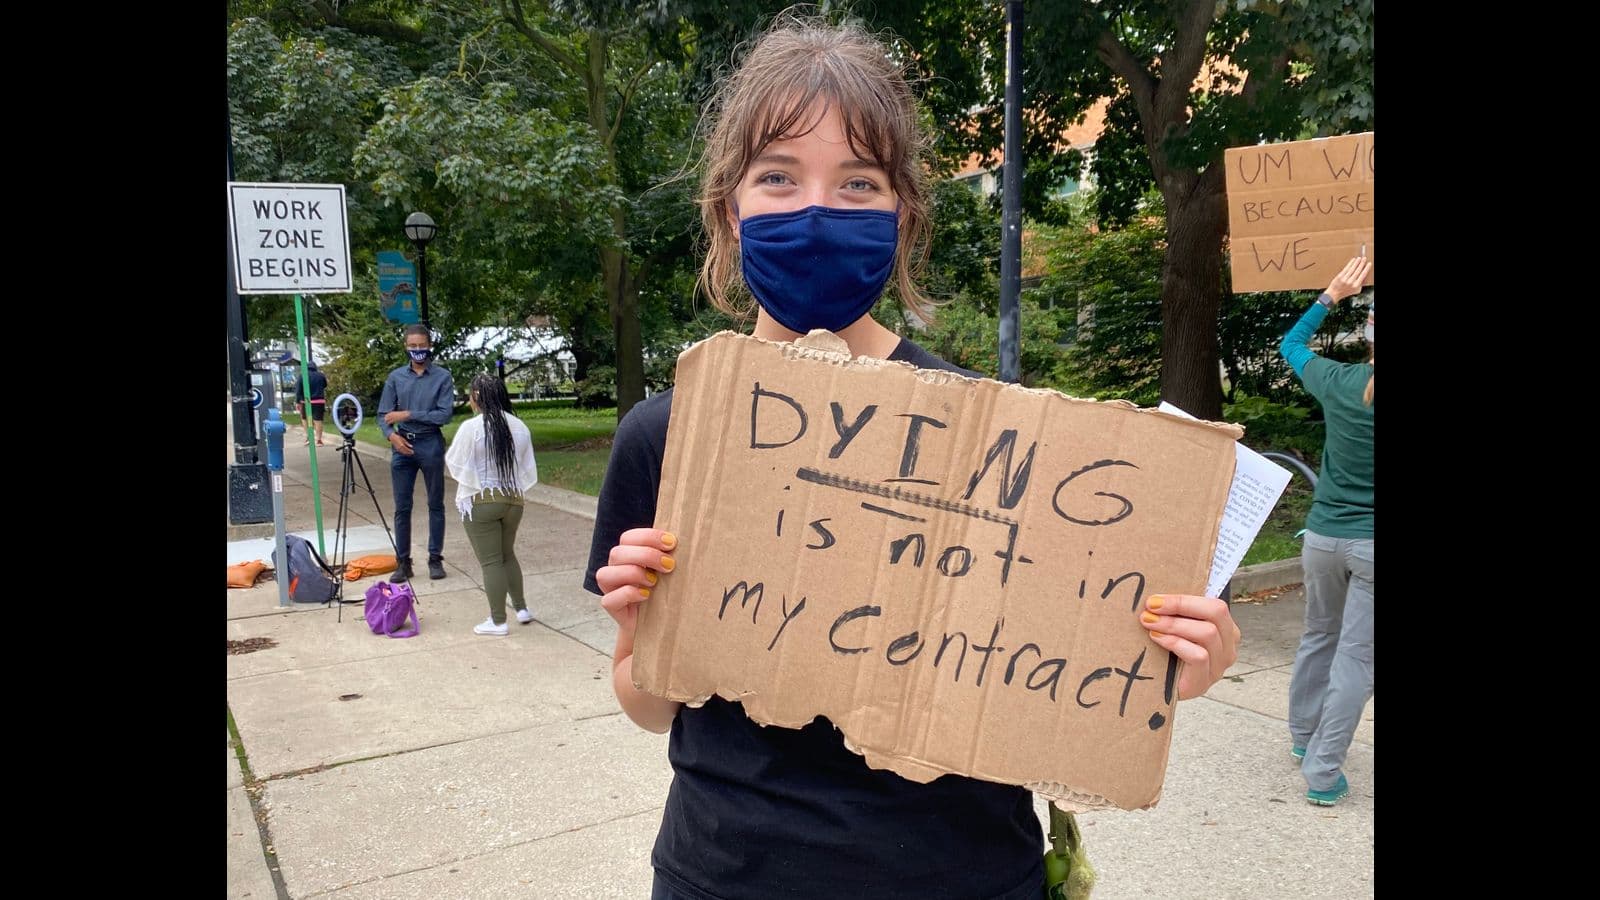 University of Michigan academic workers struck in September 2020 to prevent their exposure to COVID-19 